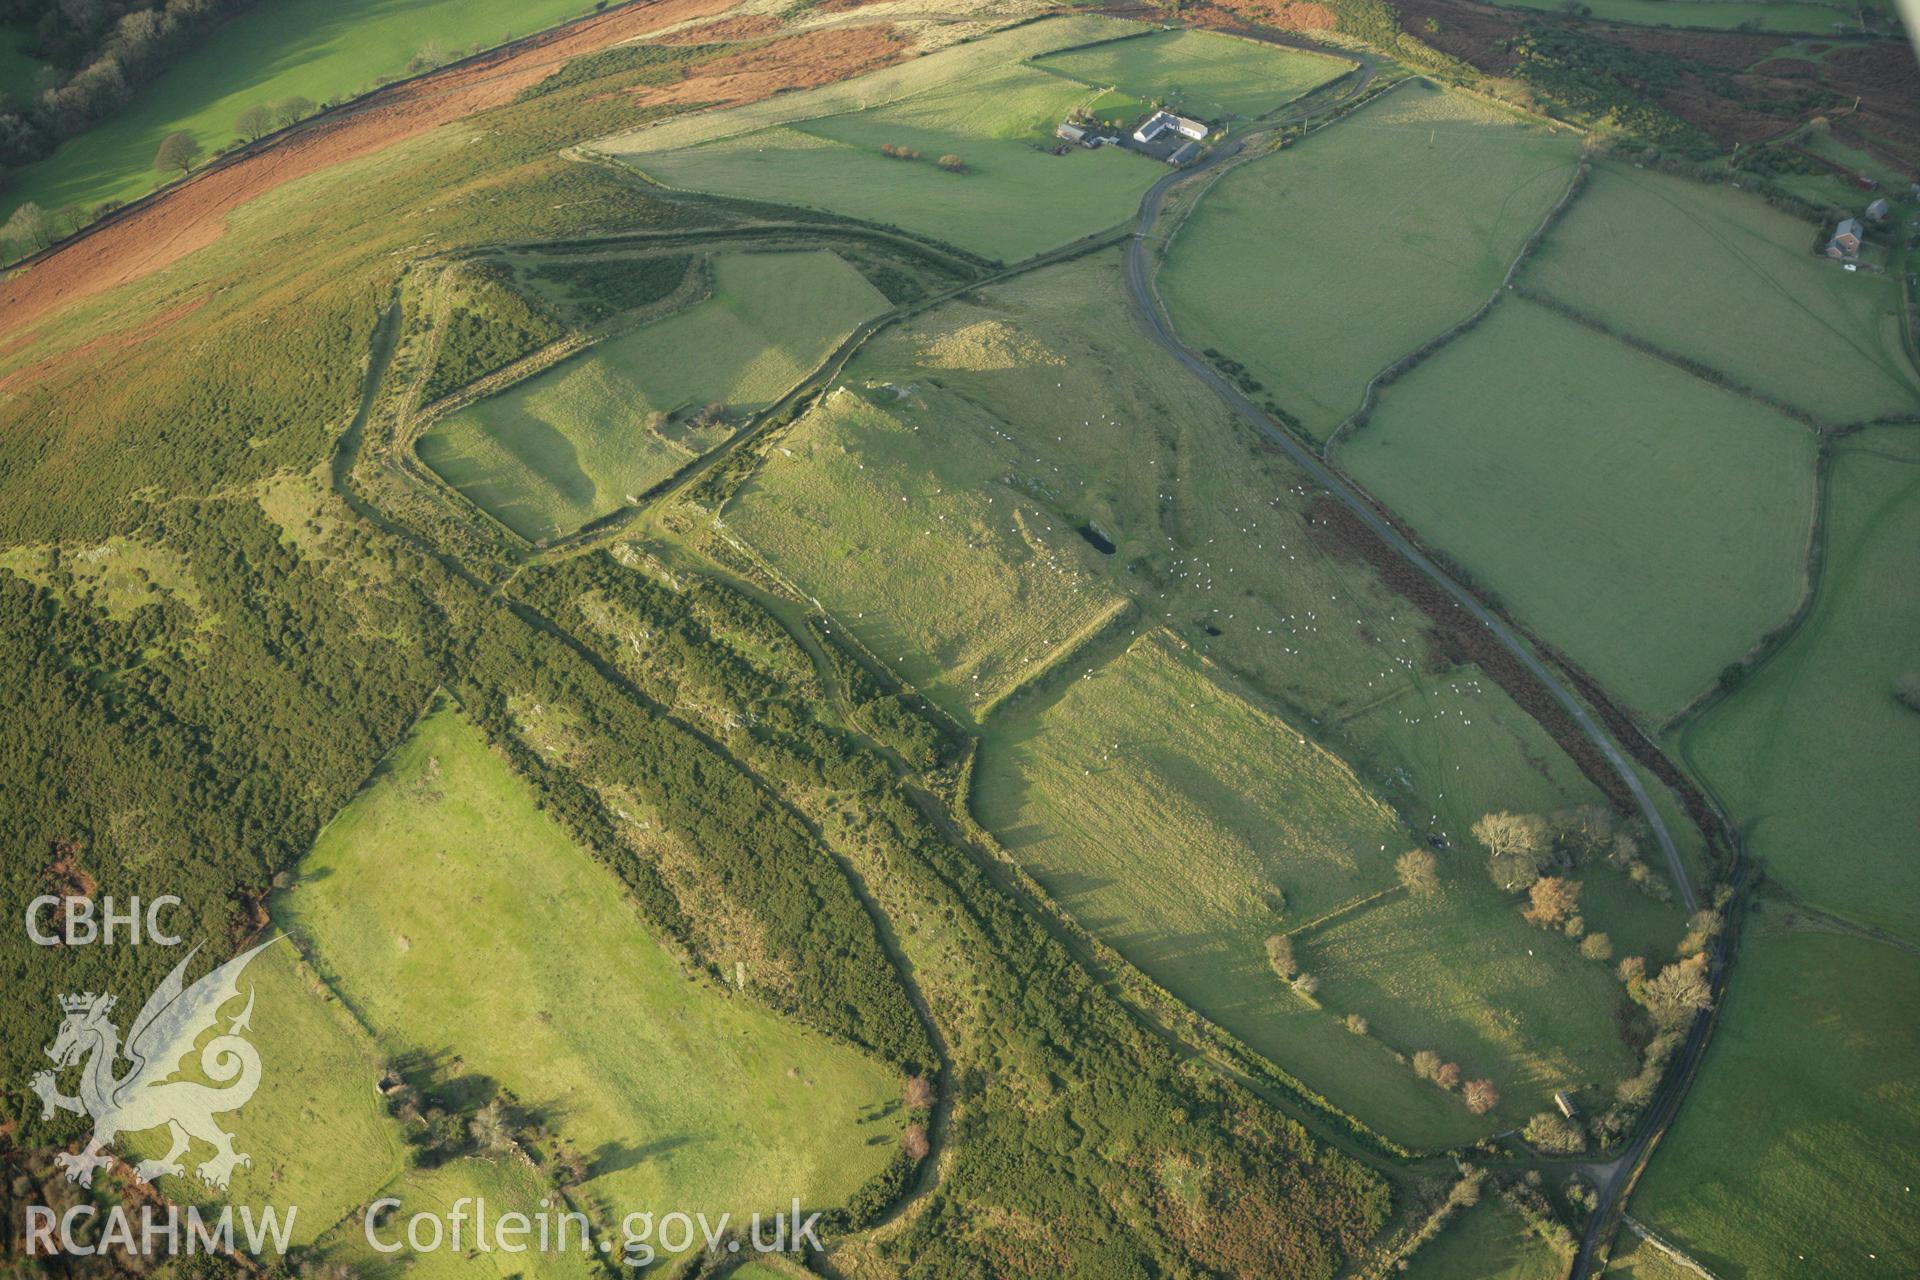 RCAHMW colour oblique photograph of Mynydd y Gaer hillfort. Taken by Toby Driver on 10/12/2009.